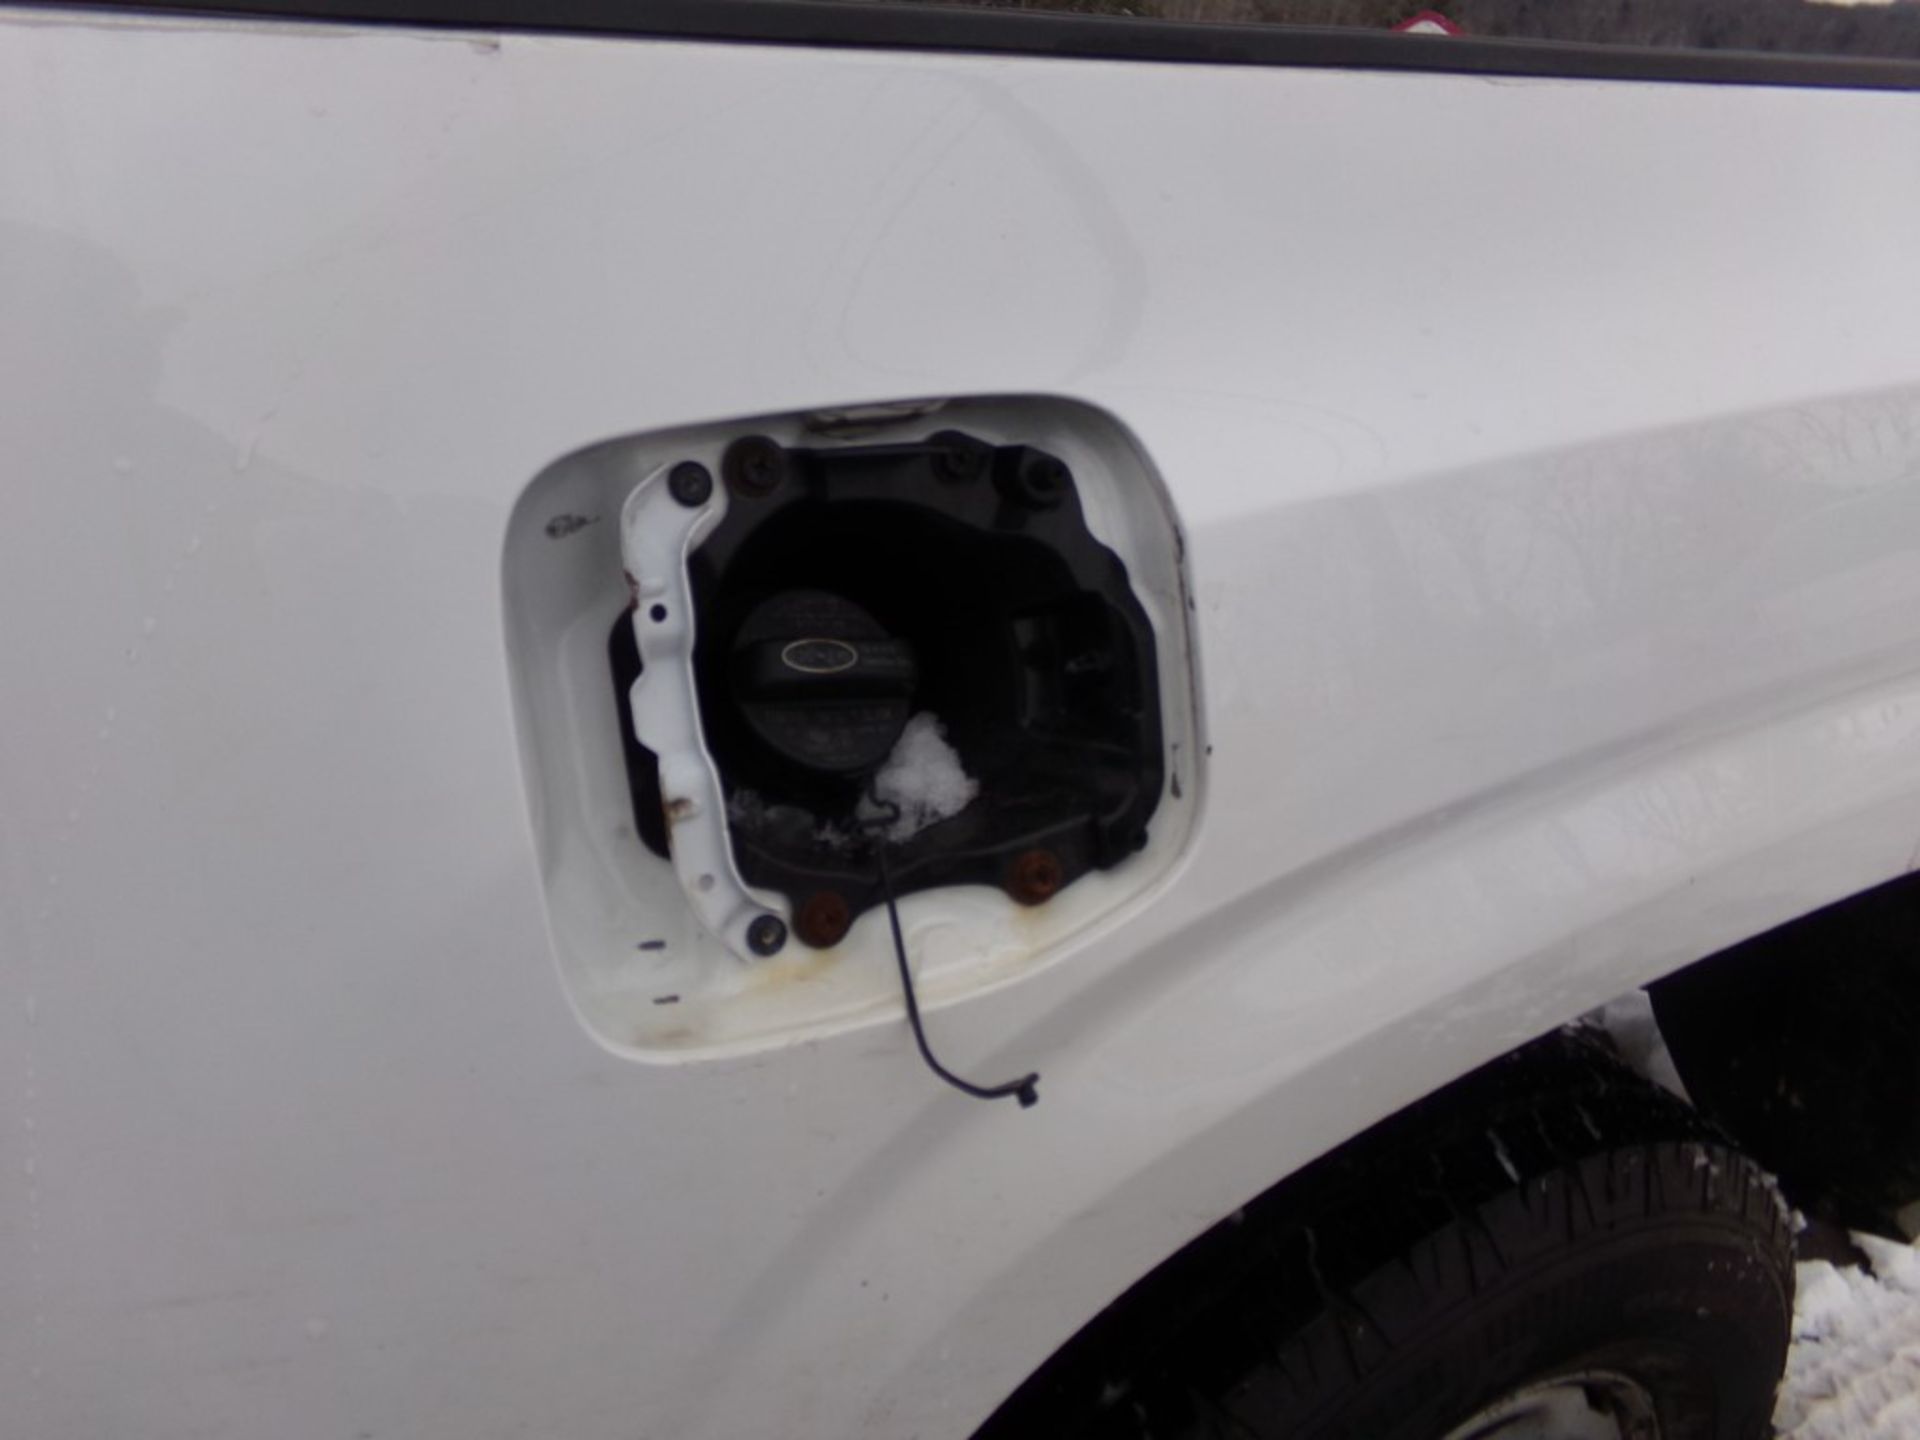 2019 Toyota Tacoma Ext Cab SR, 2wd, White, 122,834 Miles, VIN#5TFRX5GN8KX147601, GAS TANK DOOR IS - Image 6 of 7